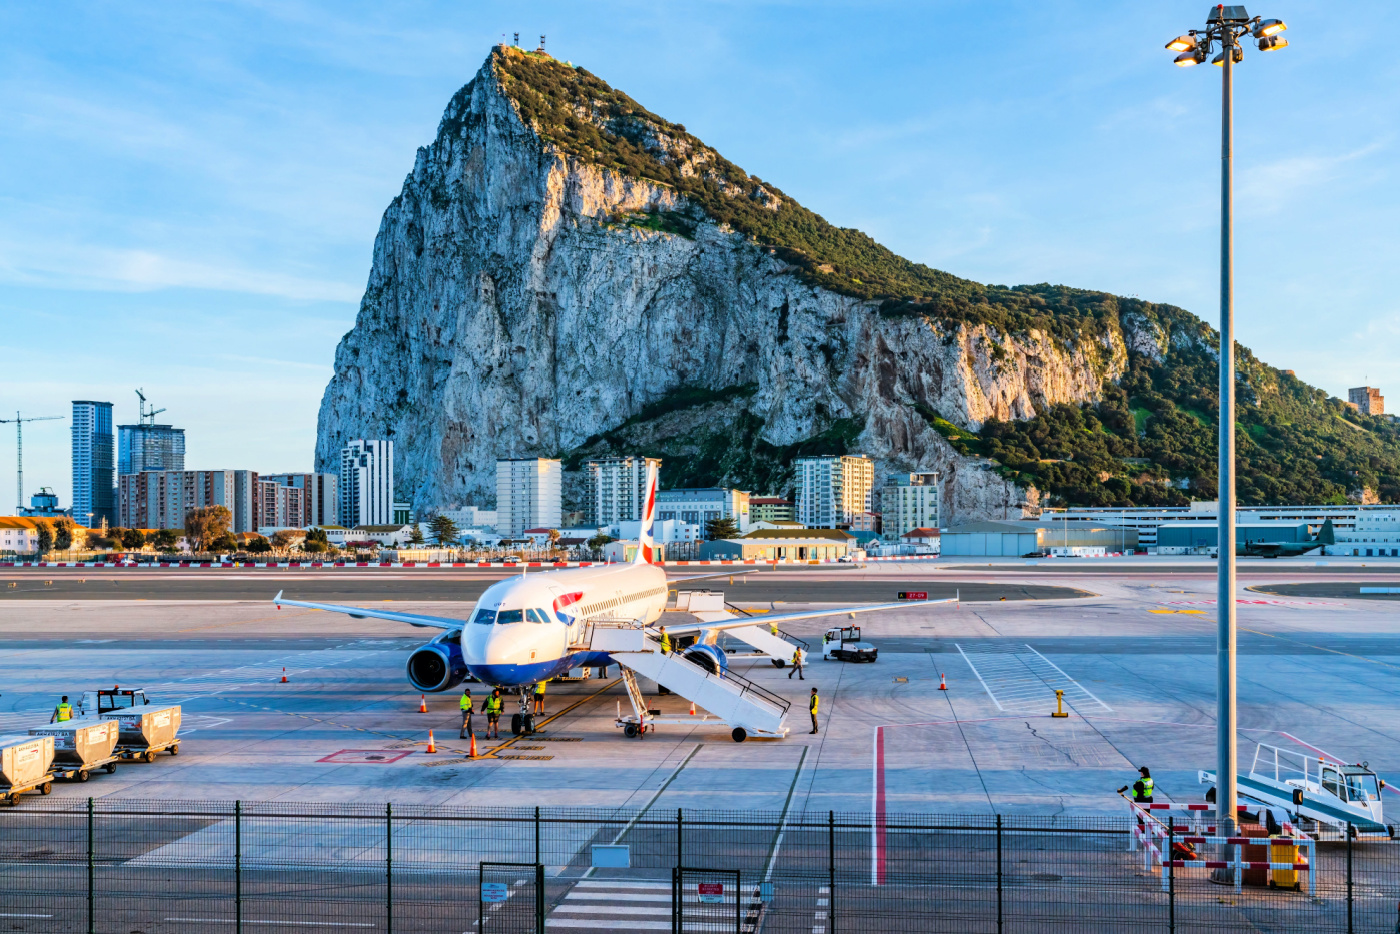 place to visit in gibraltar